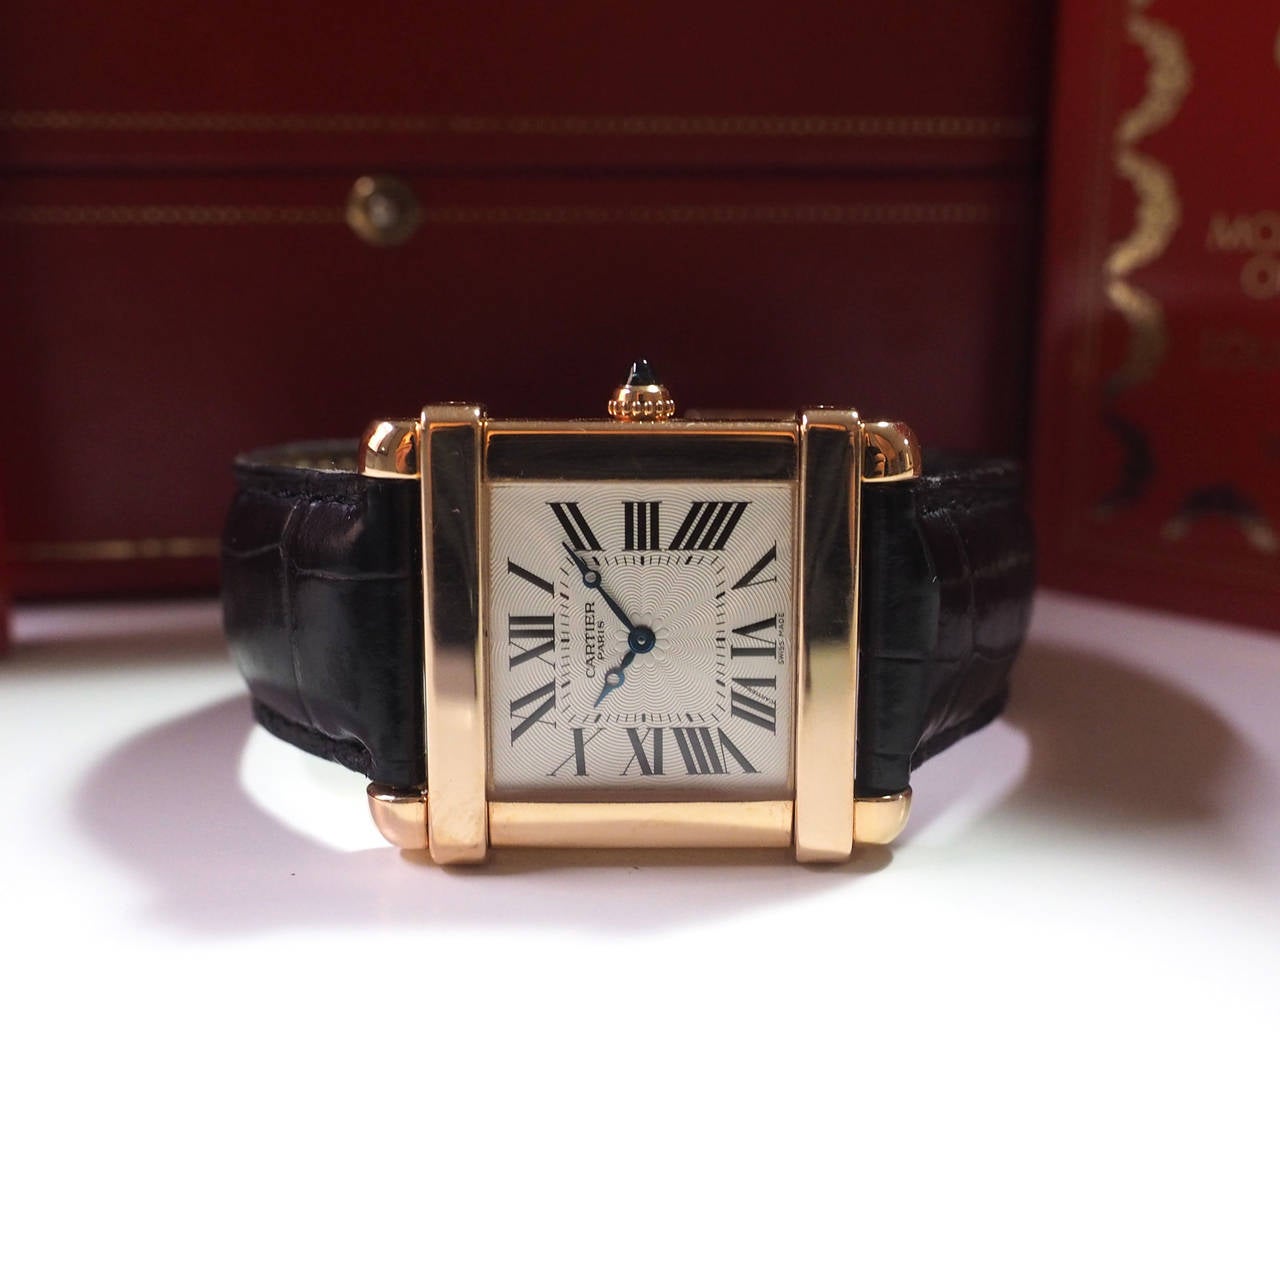 Cartier
Cartier Chinoise
Ref.: W 1542451
18K Pink Gold Case
Silvered Guilloché Dial with Roman Numerals
18K Pink Gold Cartier Deployante
Manual Winding
Dimensions: 29 x 29 mm
Year: About 2000